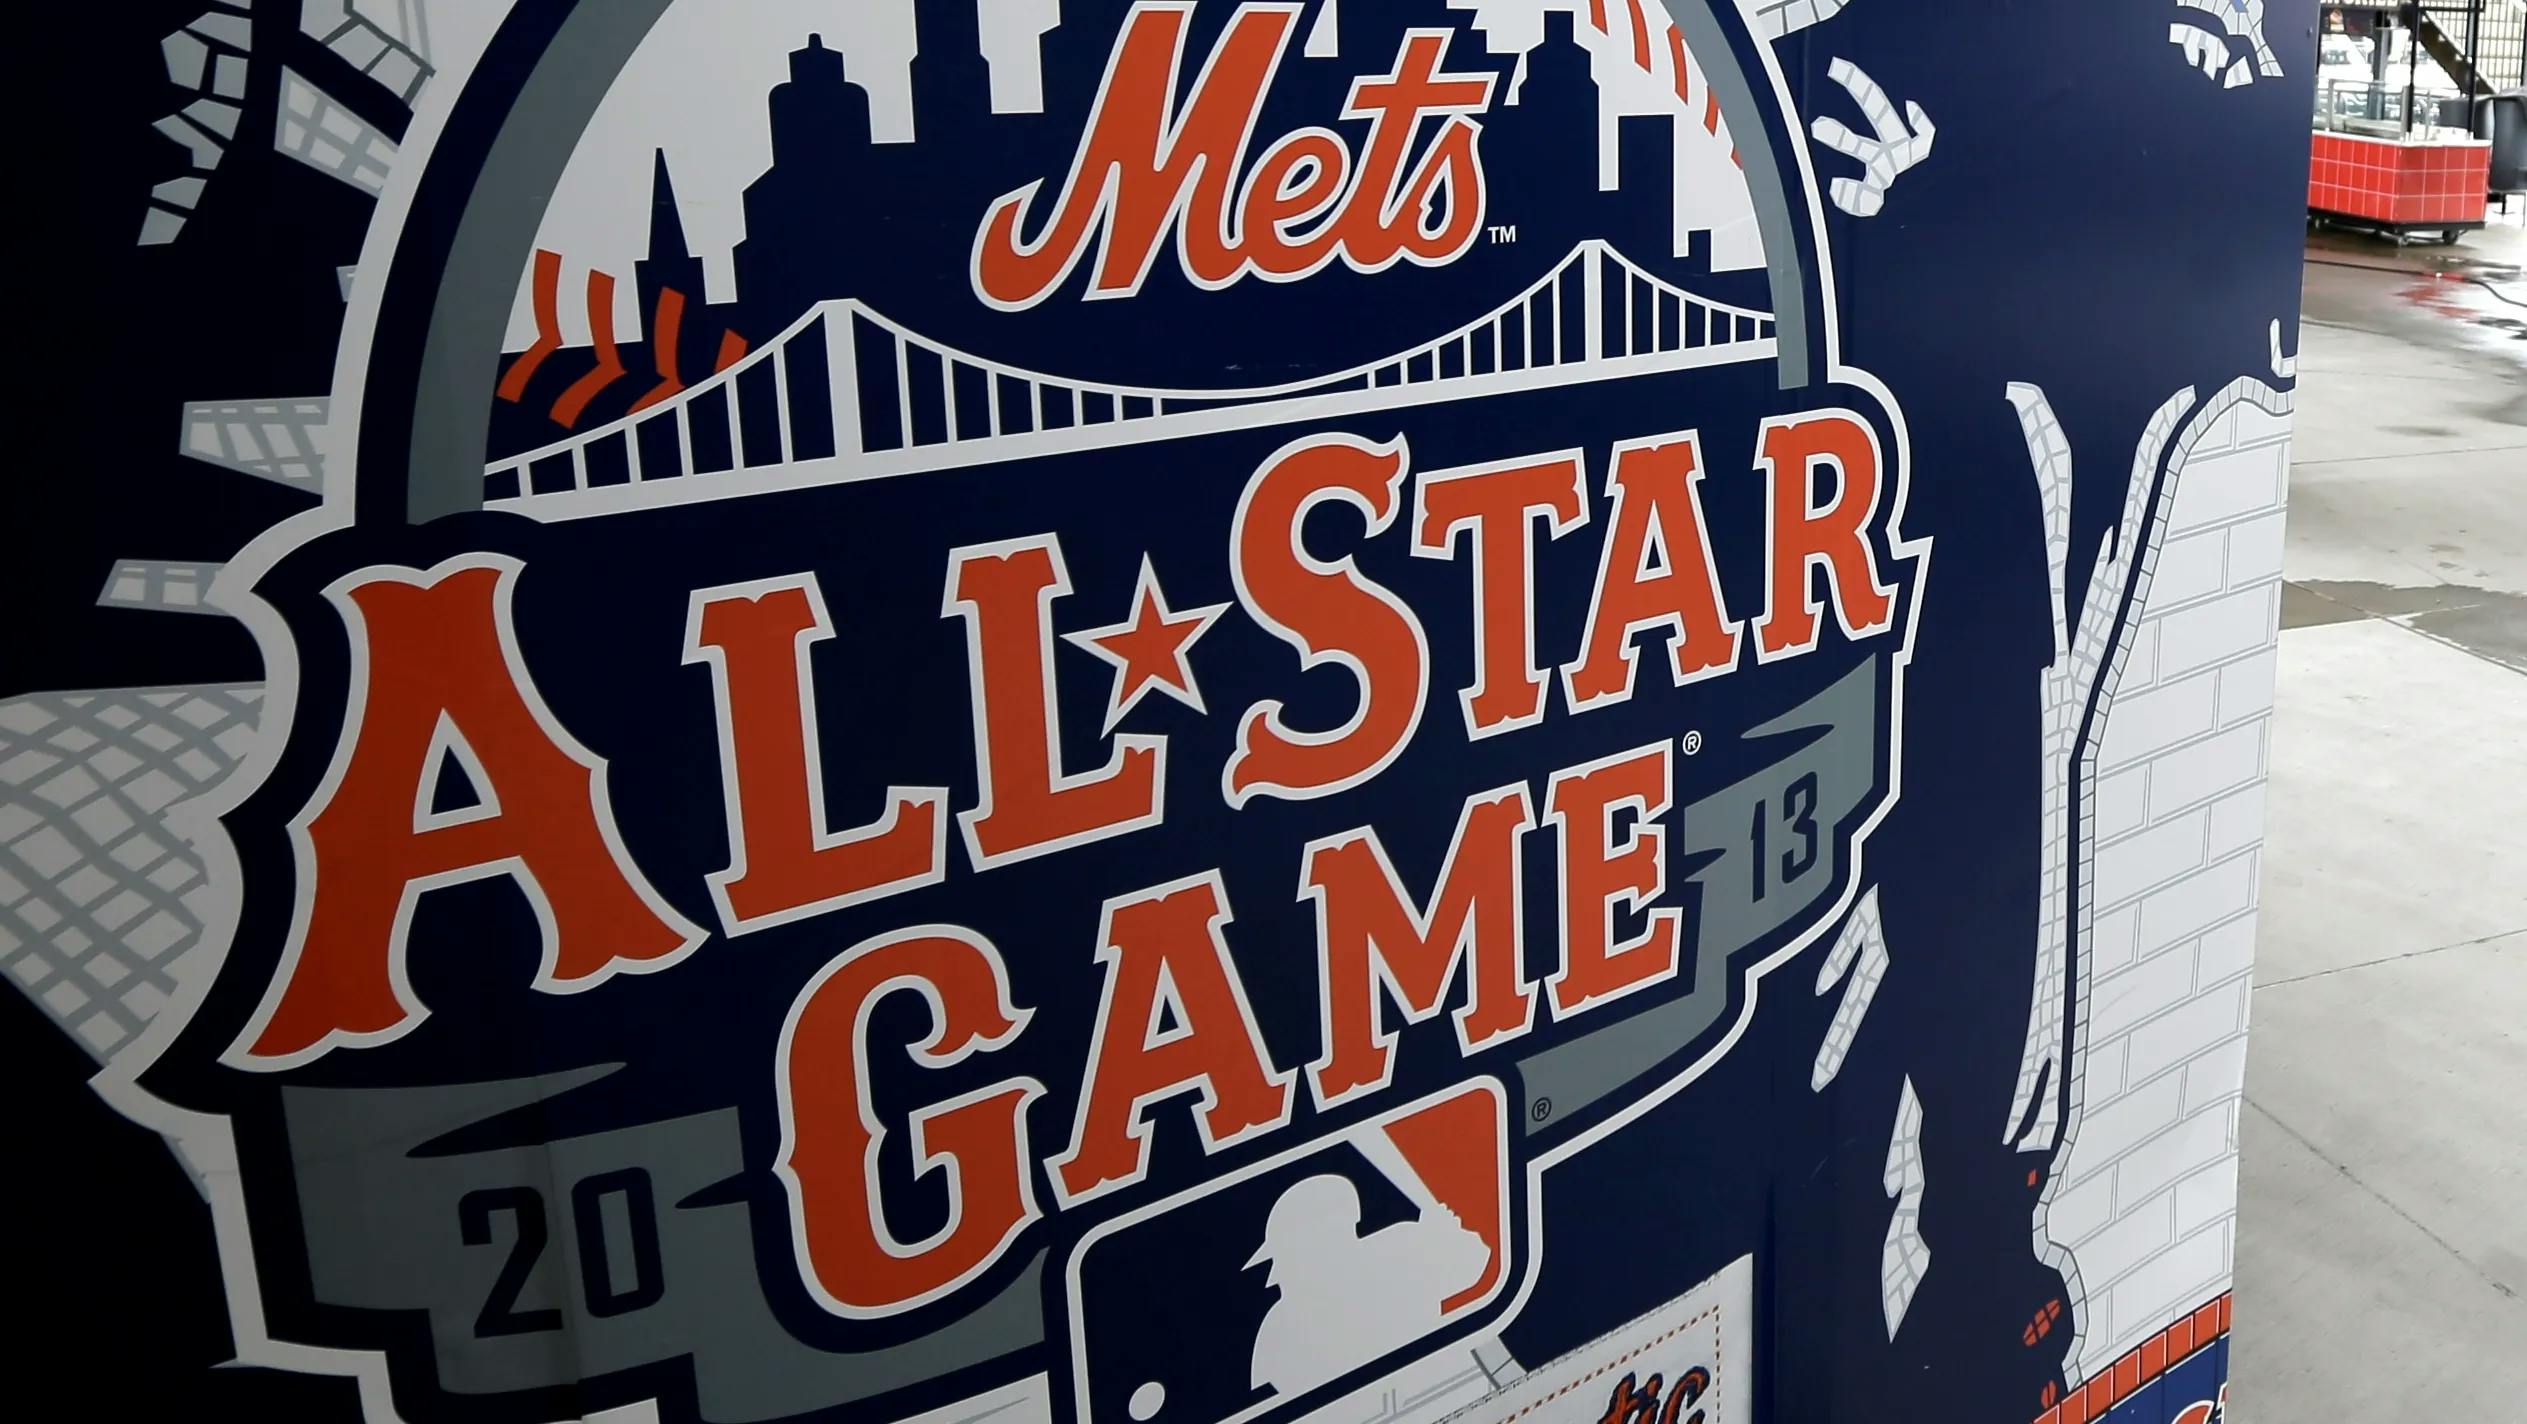 Mets All Star Game logo